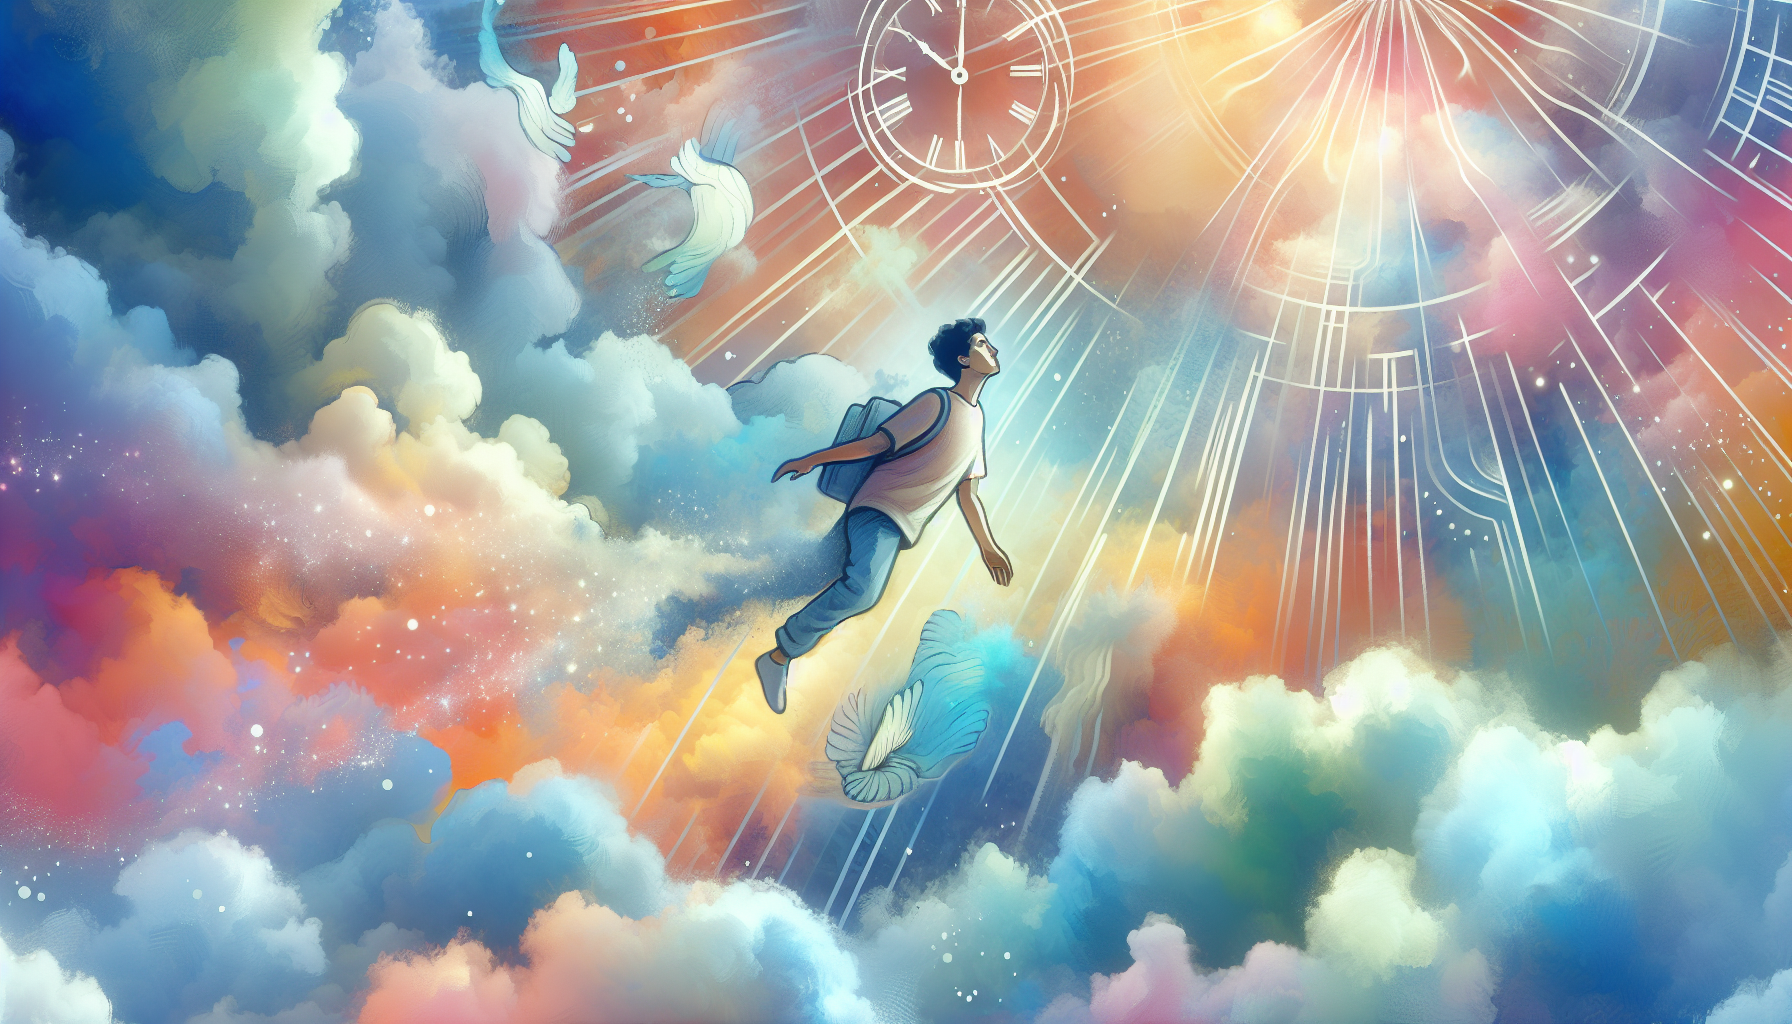 An ethereal and serene painting depicting a person gently falling through a vibrant dreamscape of soft clouds, floating clocks, and surreal landscapes, with a look of peaceful discovery on their face,